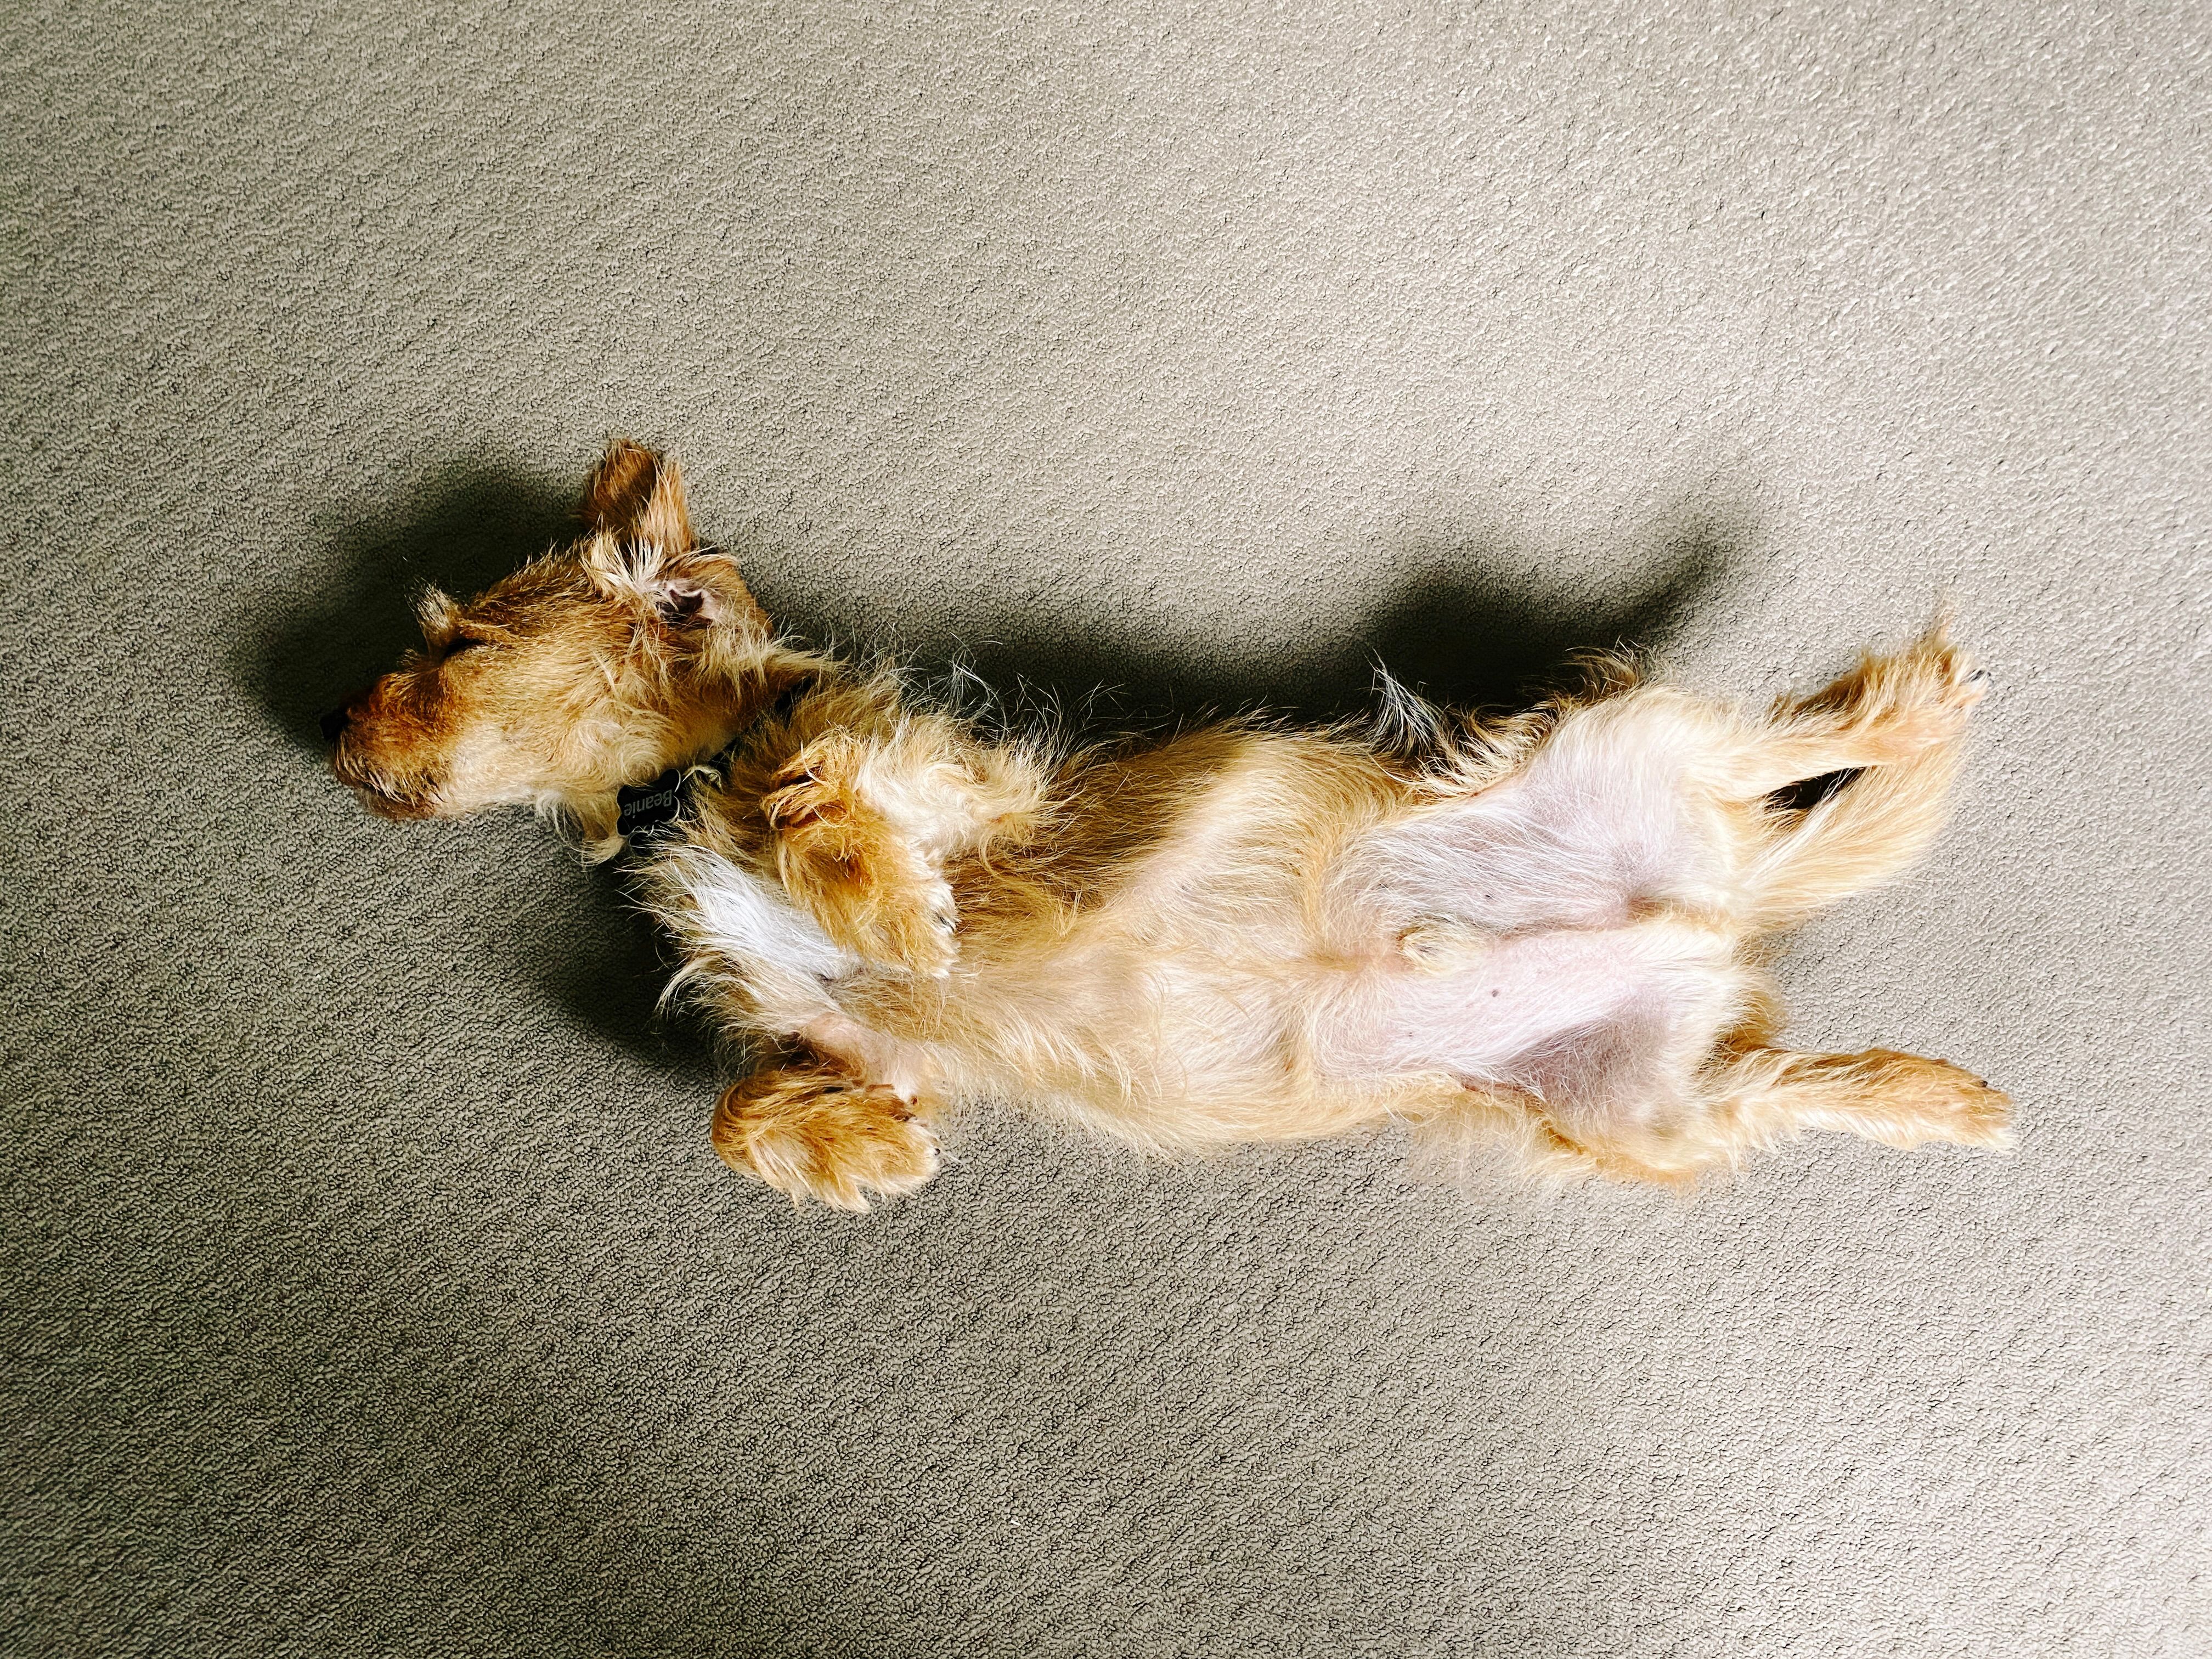 A photo of a small scruffy blonde dog lying upside-down on the floor fully stretched out, fast asleep.